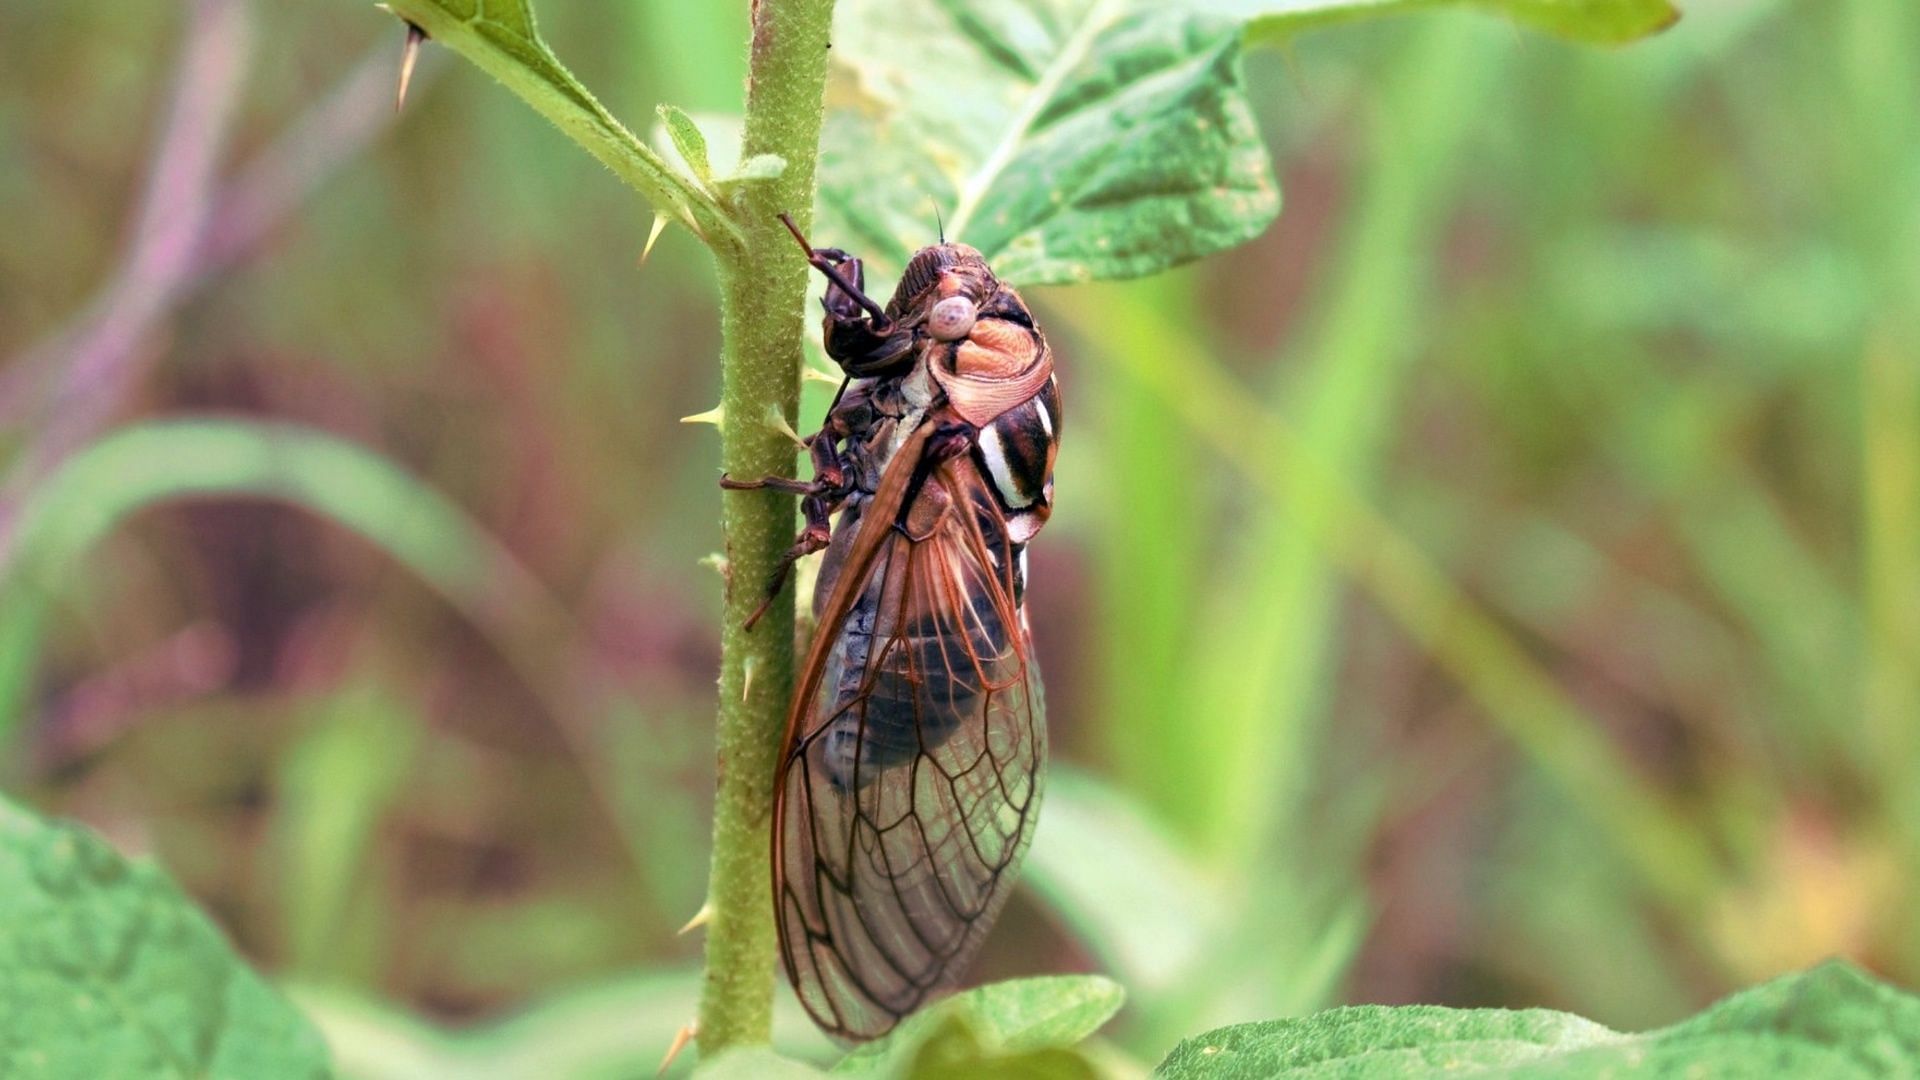 Two broods of cicadas are to emerge together in springtime in a rare event after 221 years. (Image via Facebook/U.S. Fish and Wildlife Service)